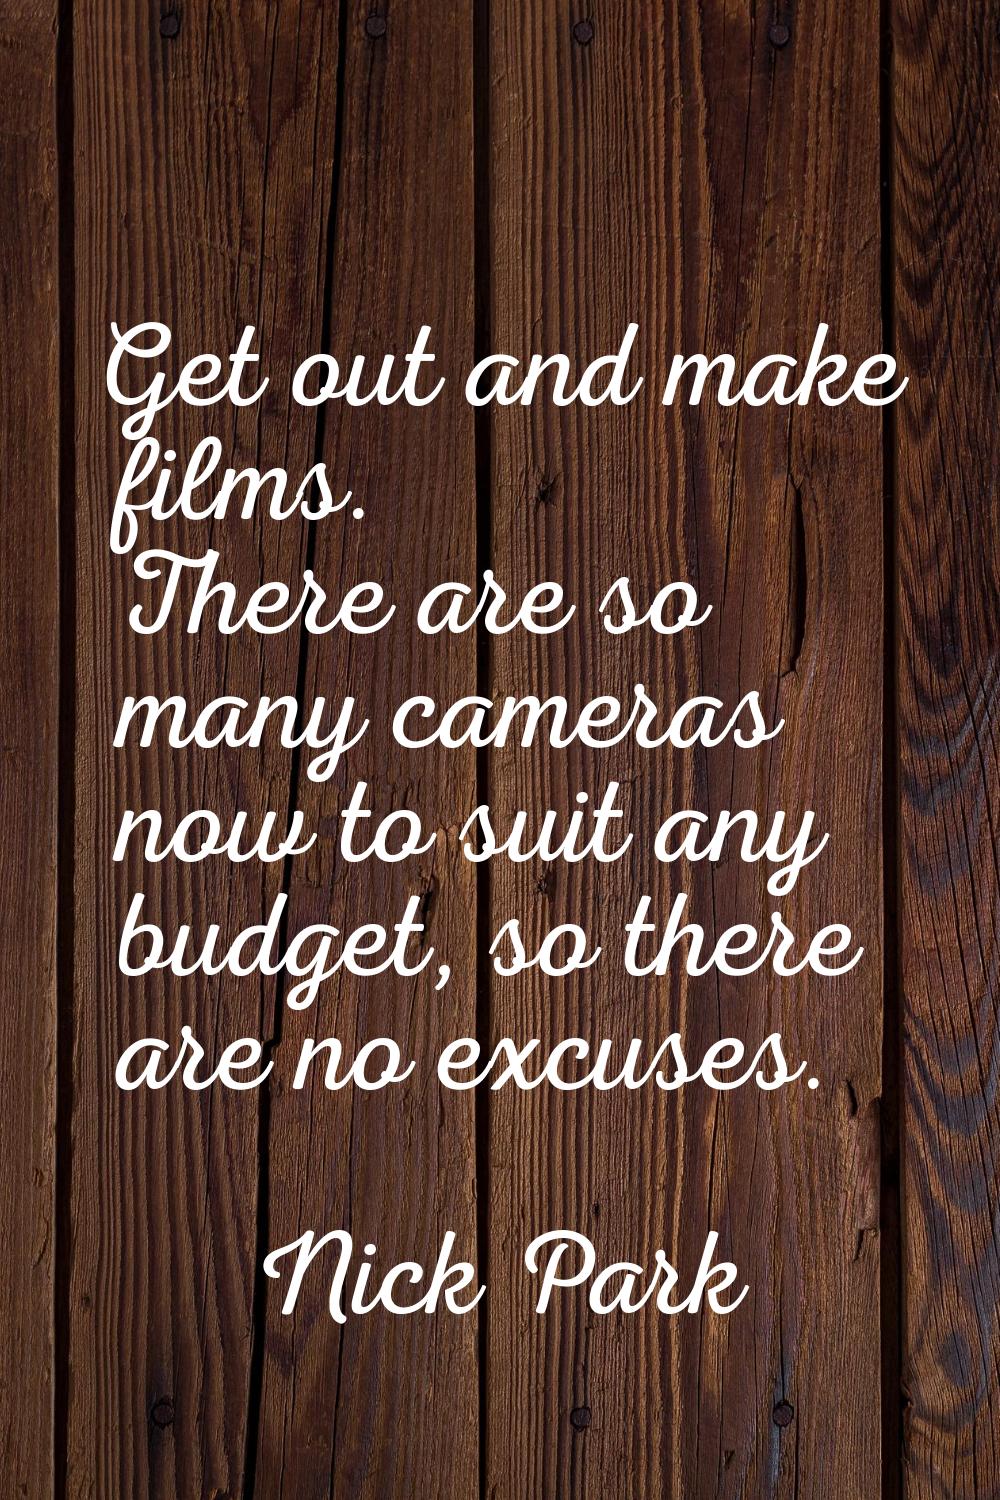 Get out and make films. There are so many cameras now to suit any budget, so there are no excuses.